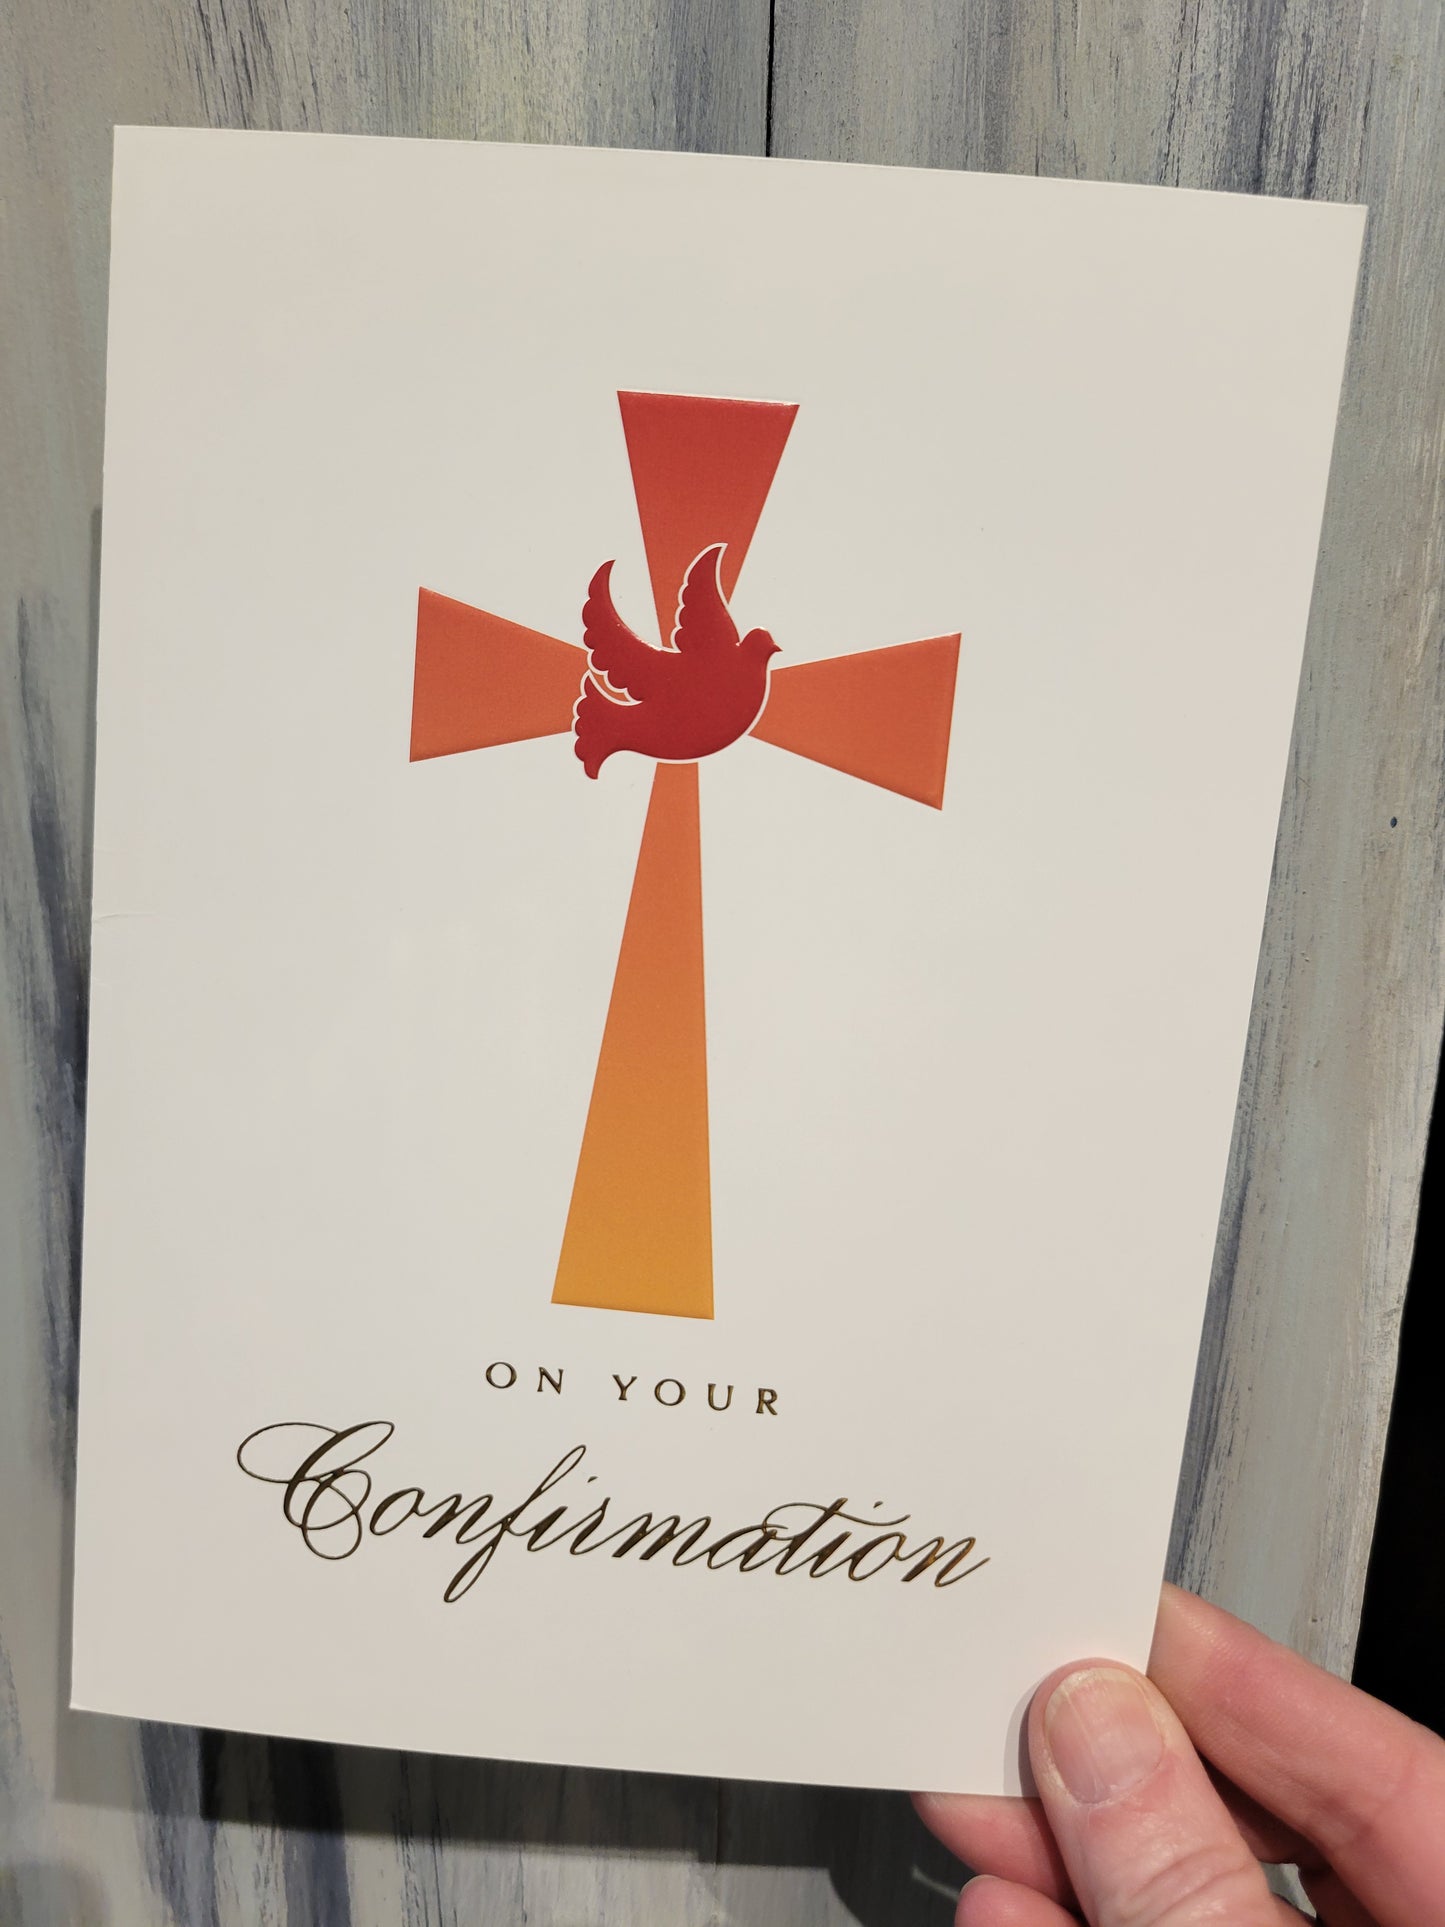 On Your Confirmation Card